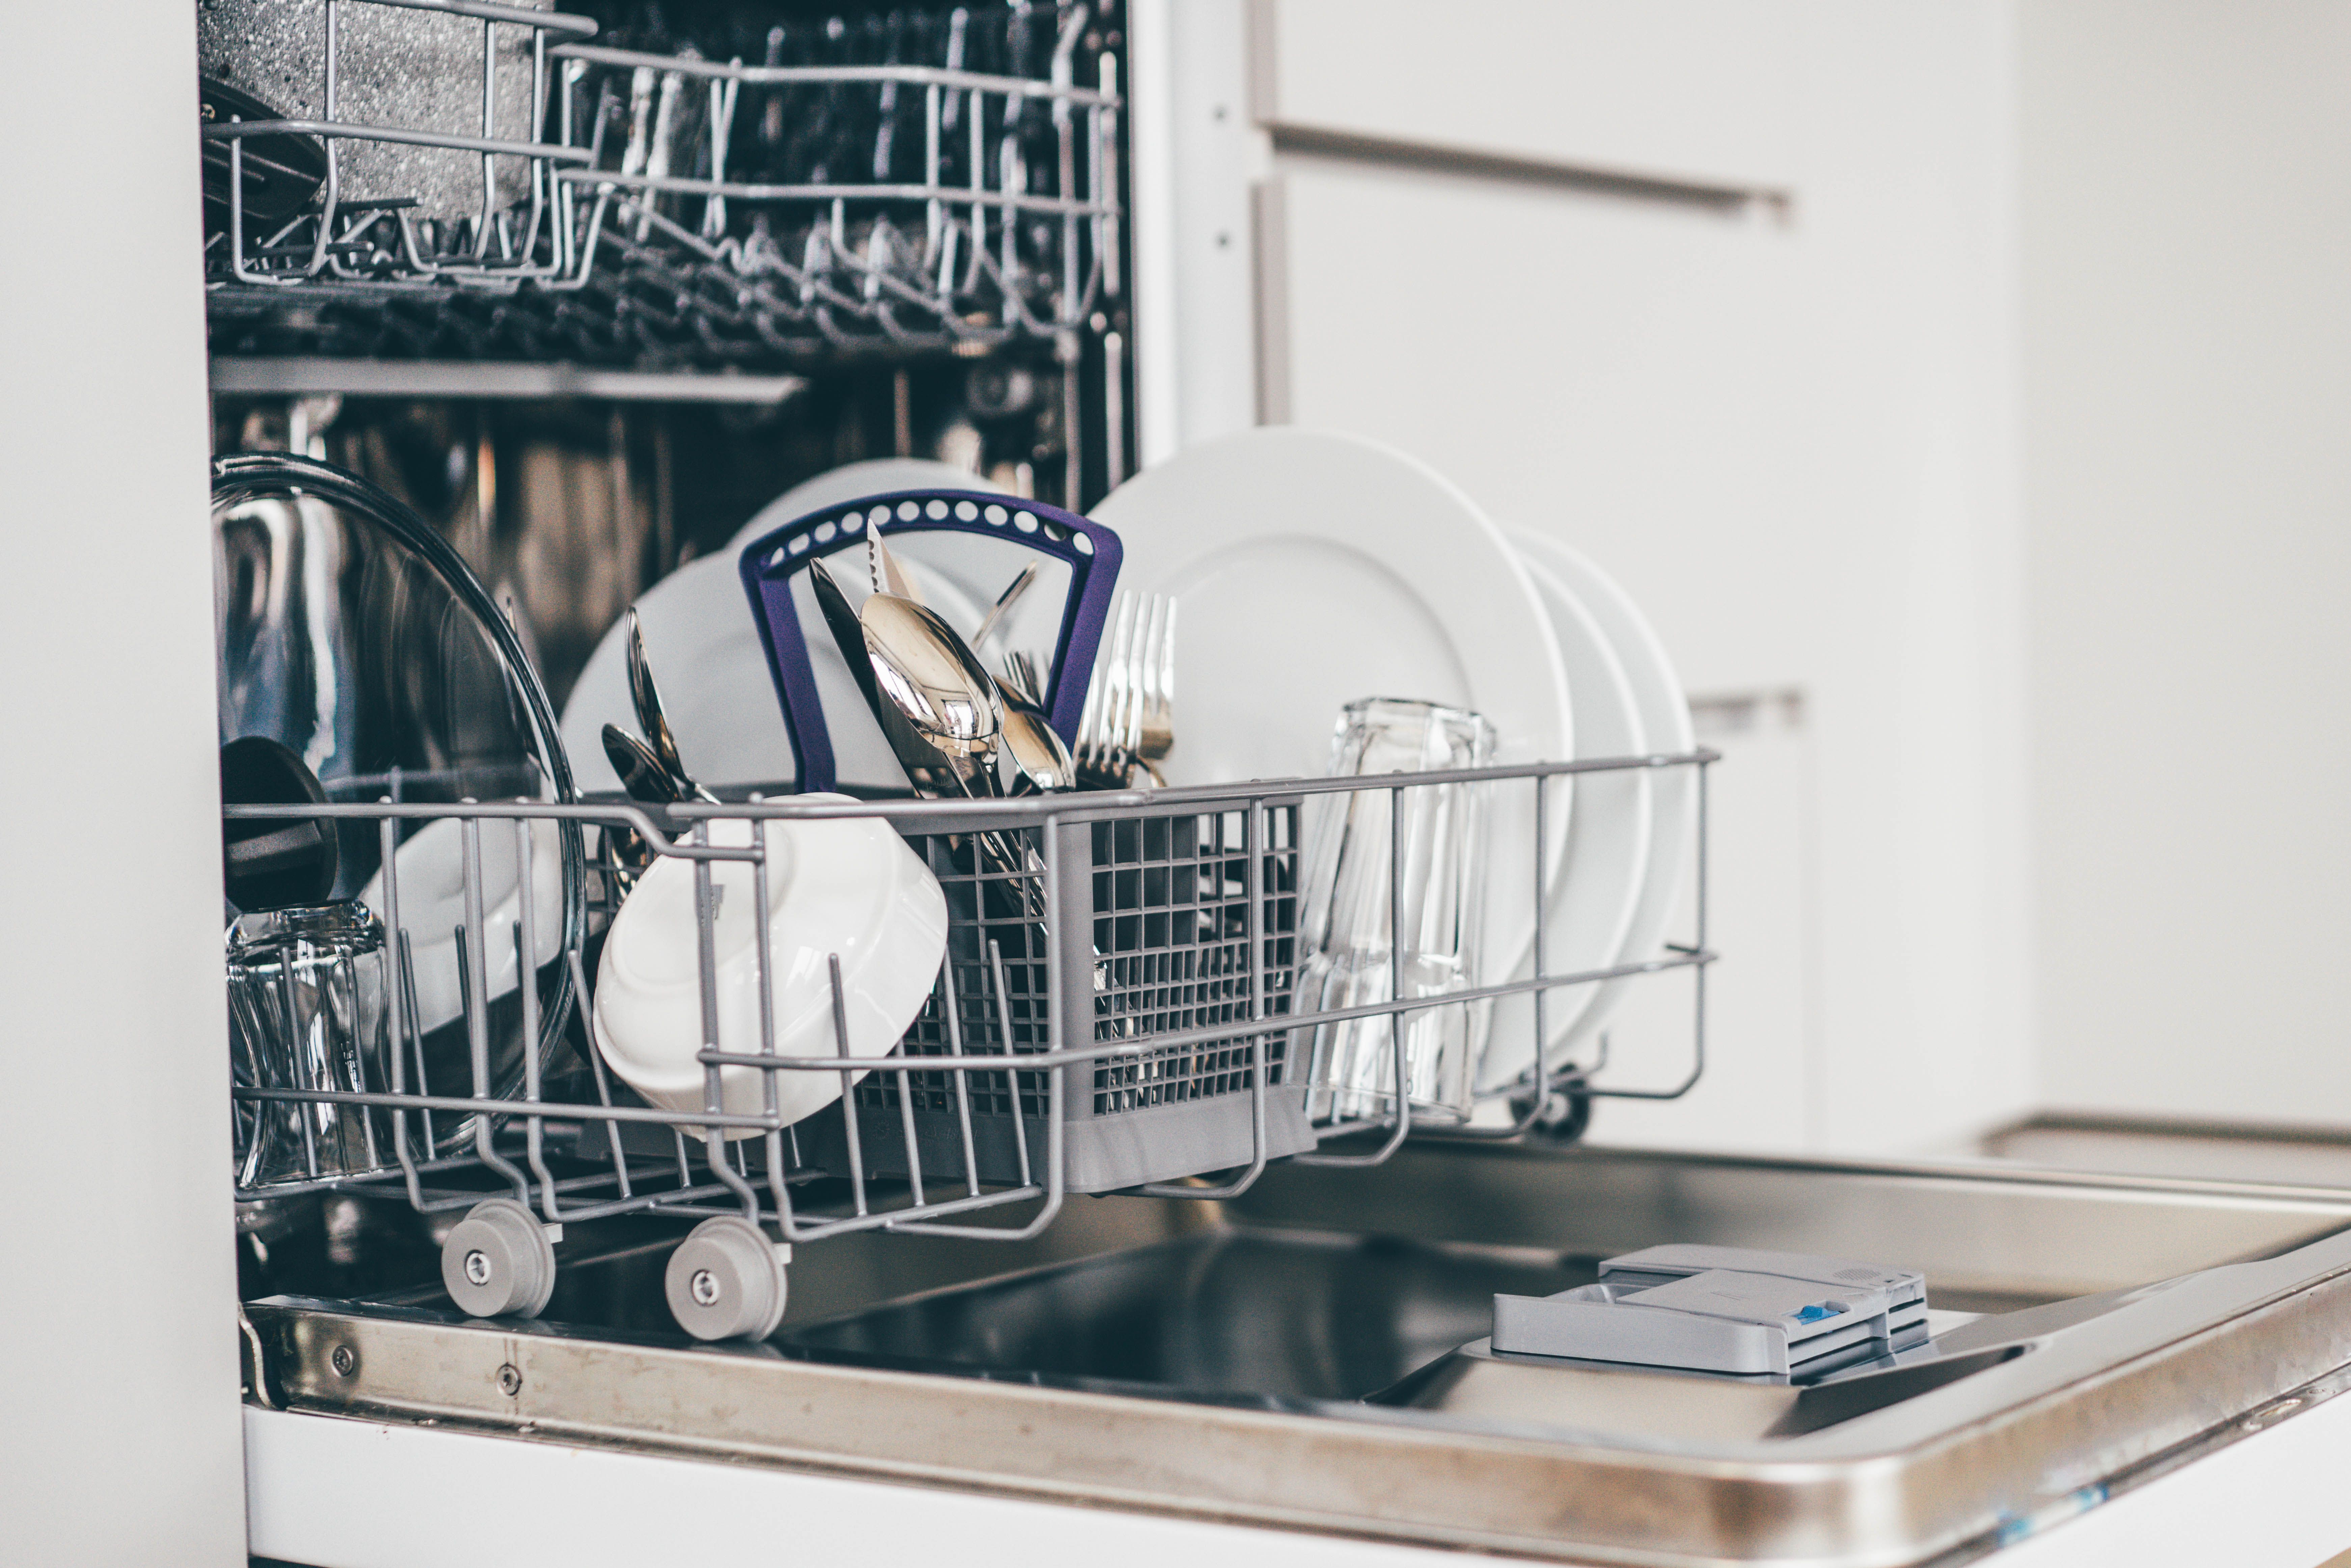 13 items you should never put in the dishwasher according to experts